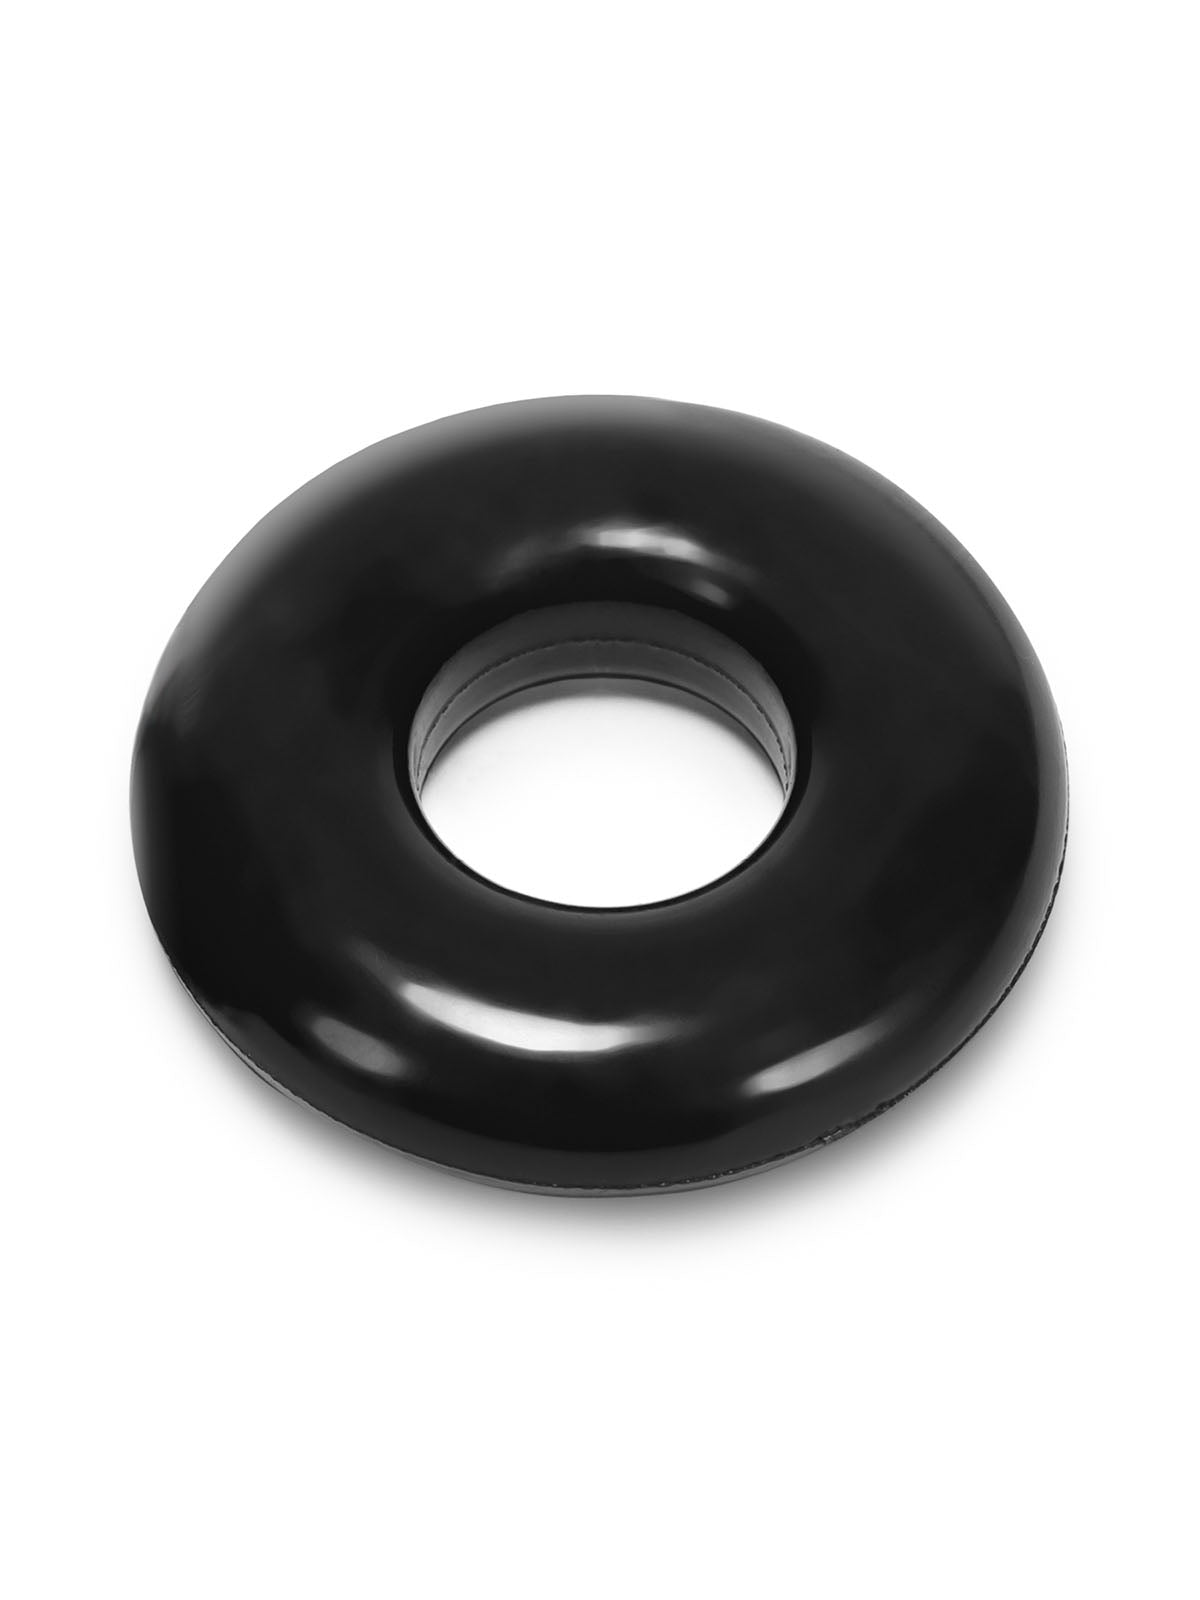 Black Do-Nut 2 Cock Ring by Oxballs